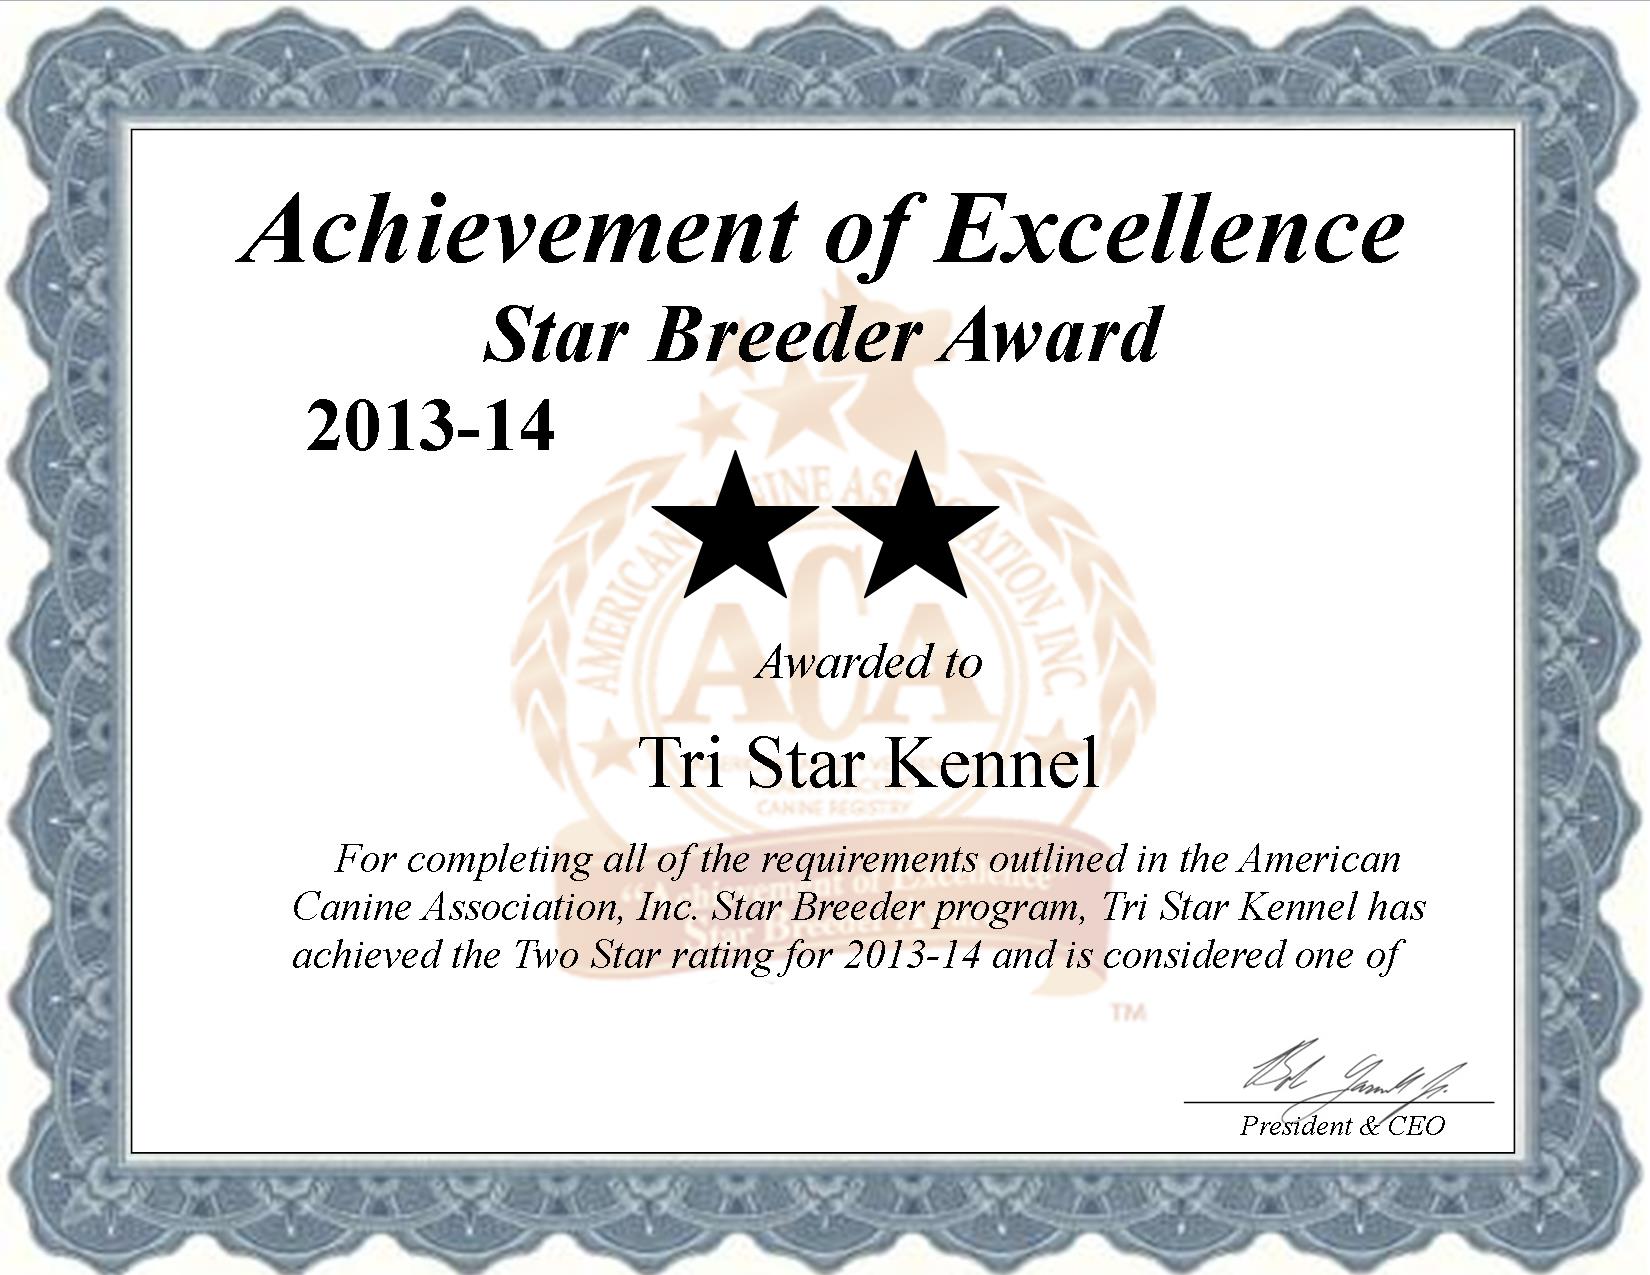 Tri Star Kennel, Tri-Star Kennel, Tristar kennel, tri star kennels, broker, tristar kennels, breeder, star breeder, star breeder, 5 star, ACA, millersburg, Ohio, oh, dog, puppy, puppies, five star, professional, show breeder, starbreeders, pet, show breeder, champions